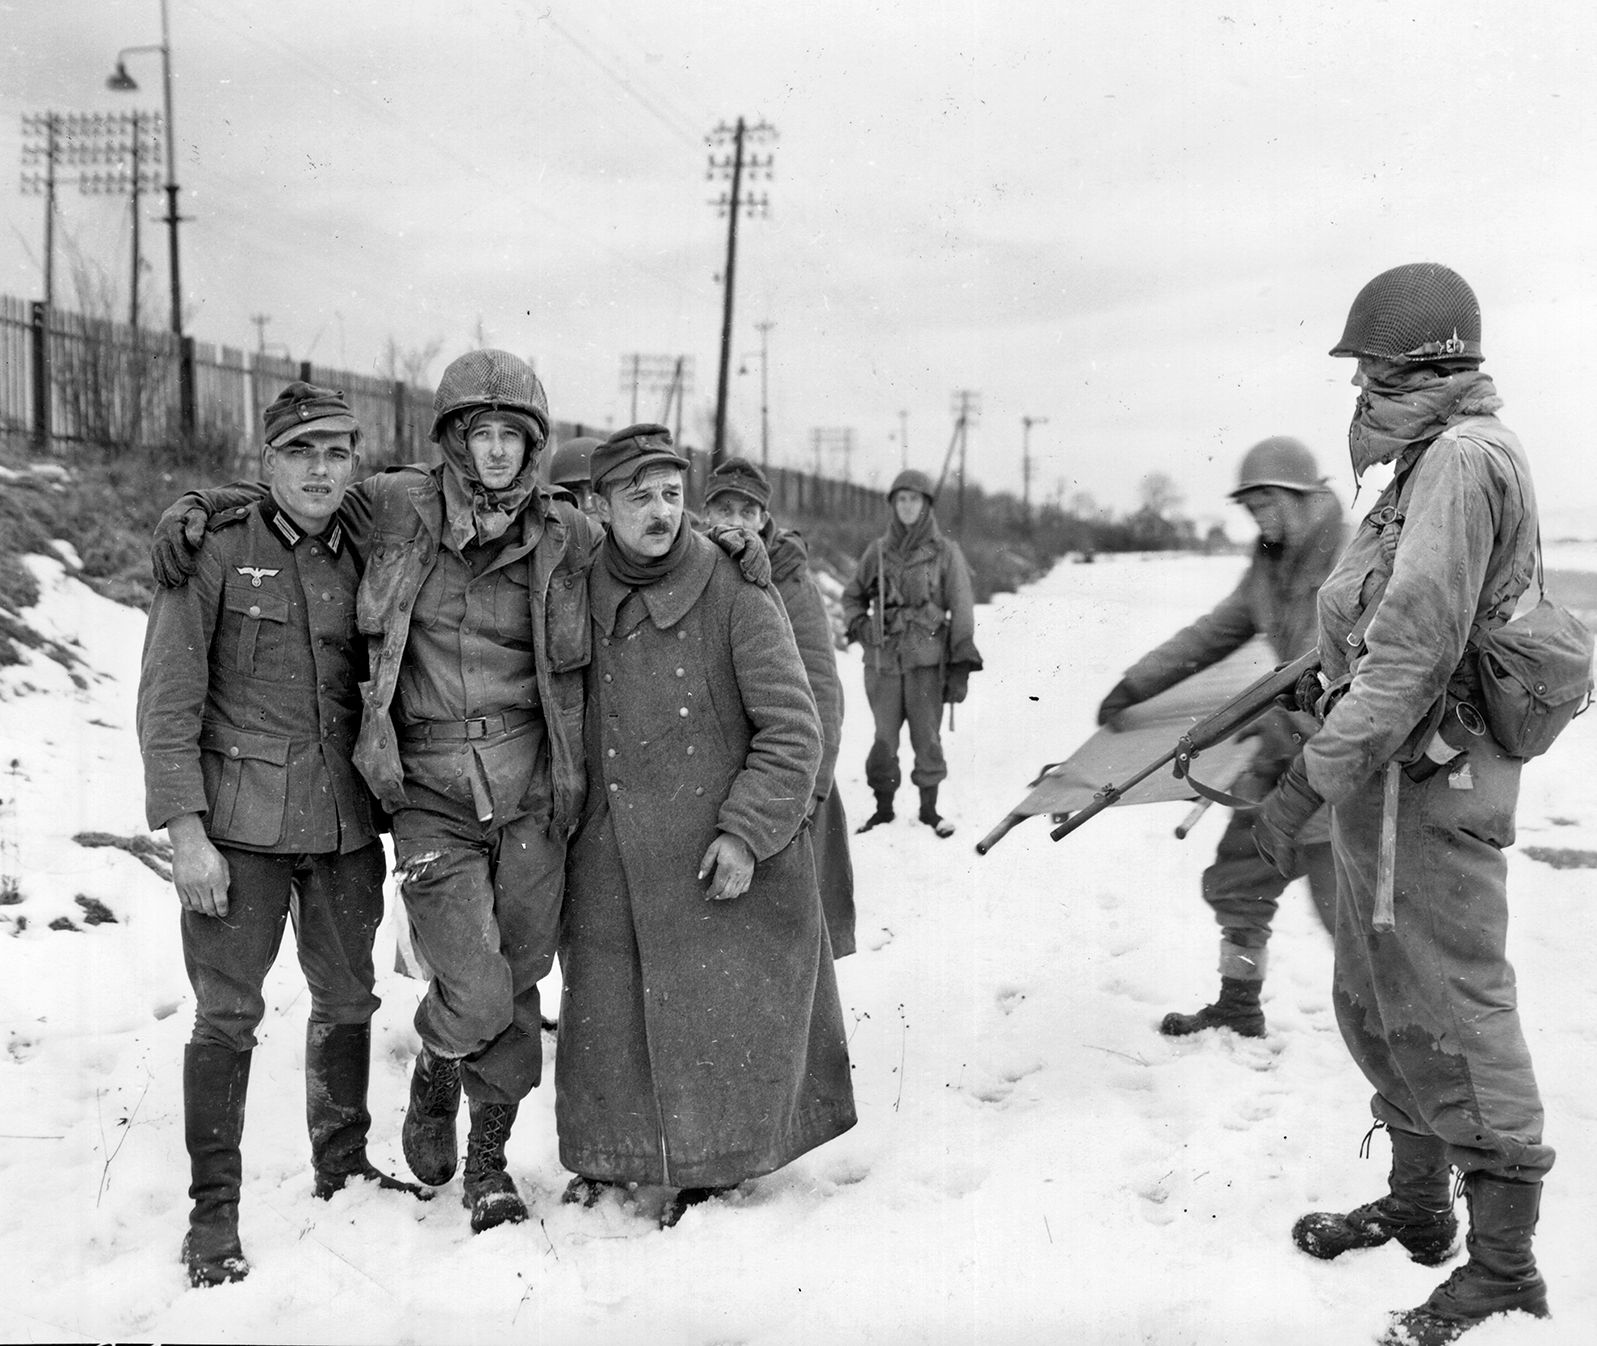 German prisoners support a wounded American soldier at the end of the offensive. The elimination of the Colmar Pocket enabled the Allies to focus exclusively on crossing the Rhine and advancing into the German heartland